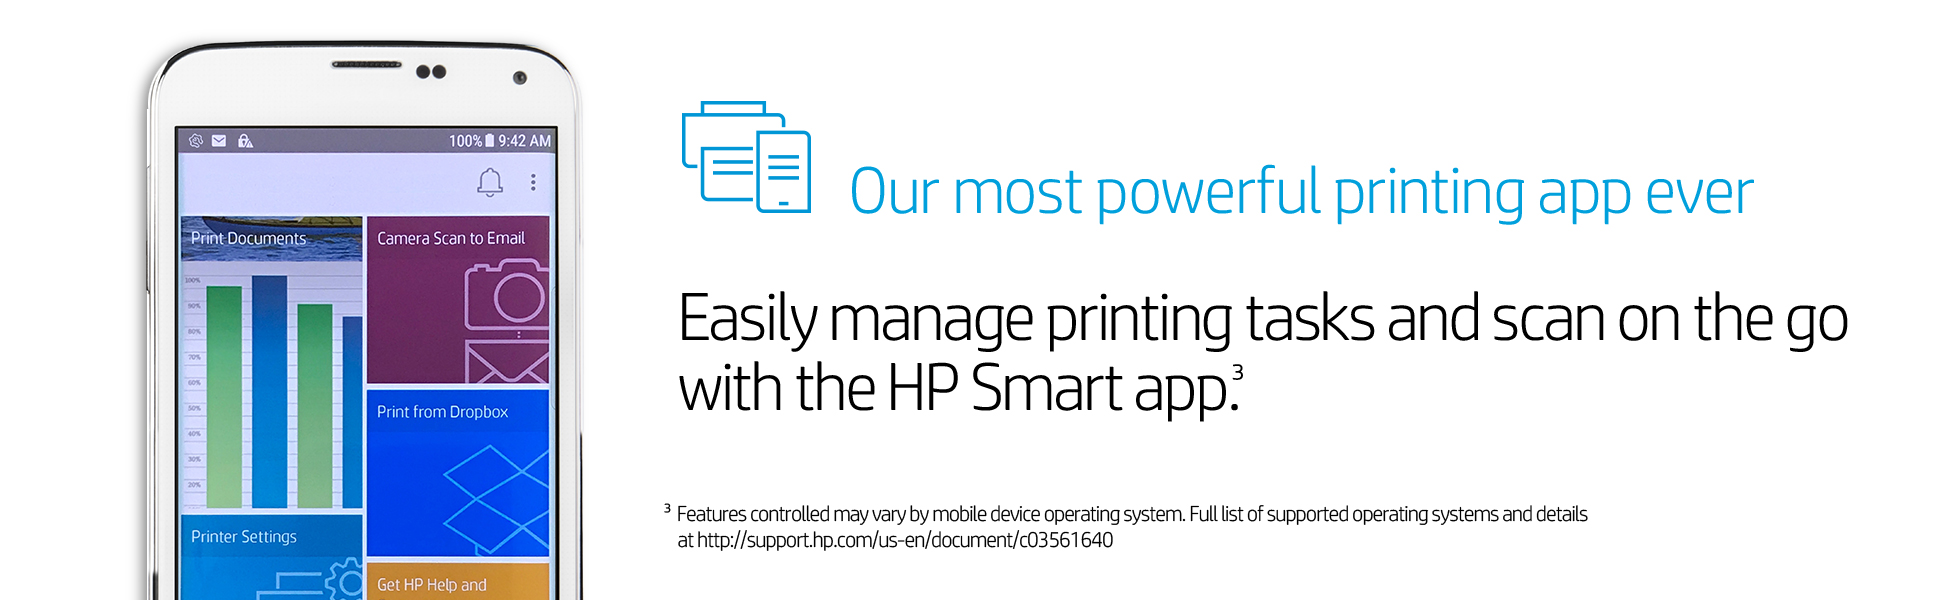 HP Officejet Pro 7720 Wide Format All-in-One - Multifunction printer -  color - ink-jet - 8.5 in x 14 in (original) - A3 (media) - up to 34 ppm  (copying) - up